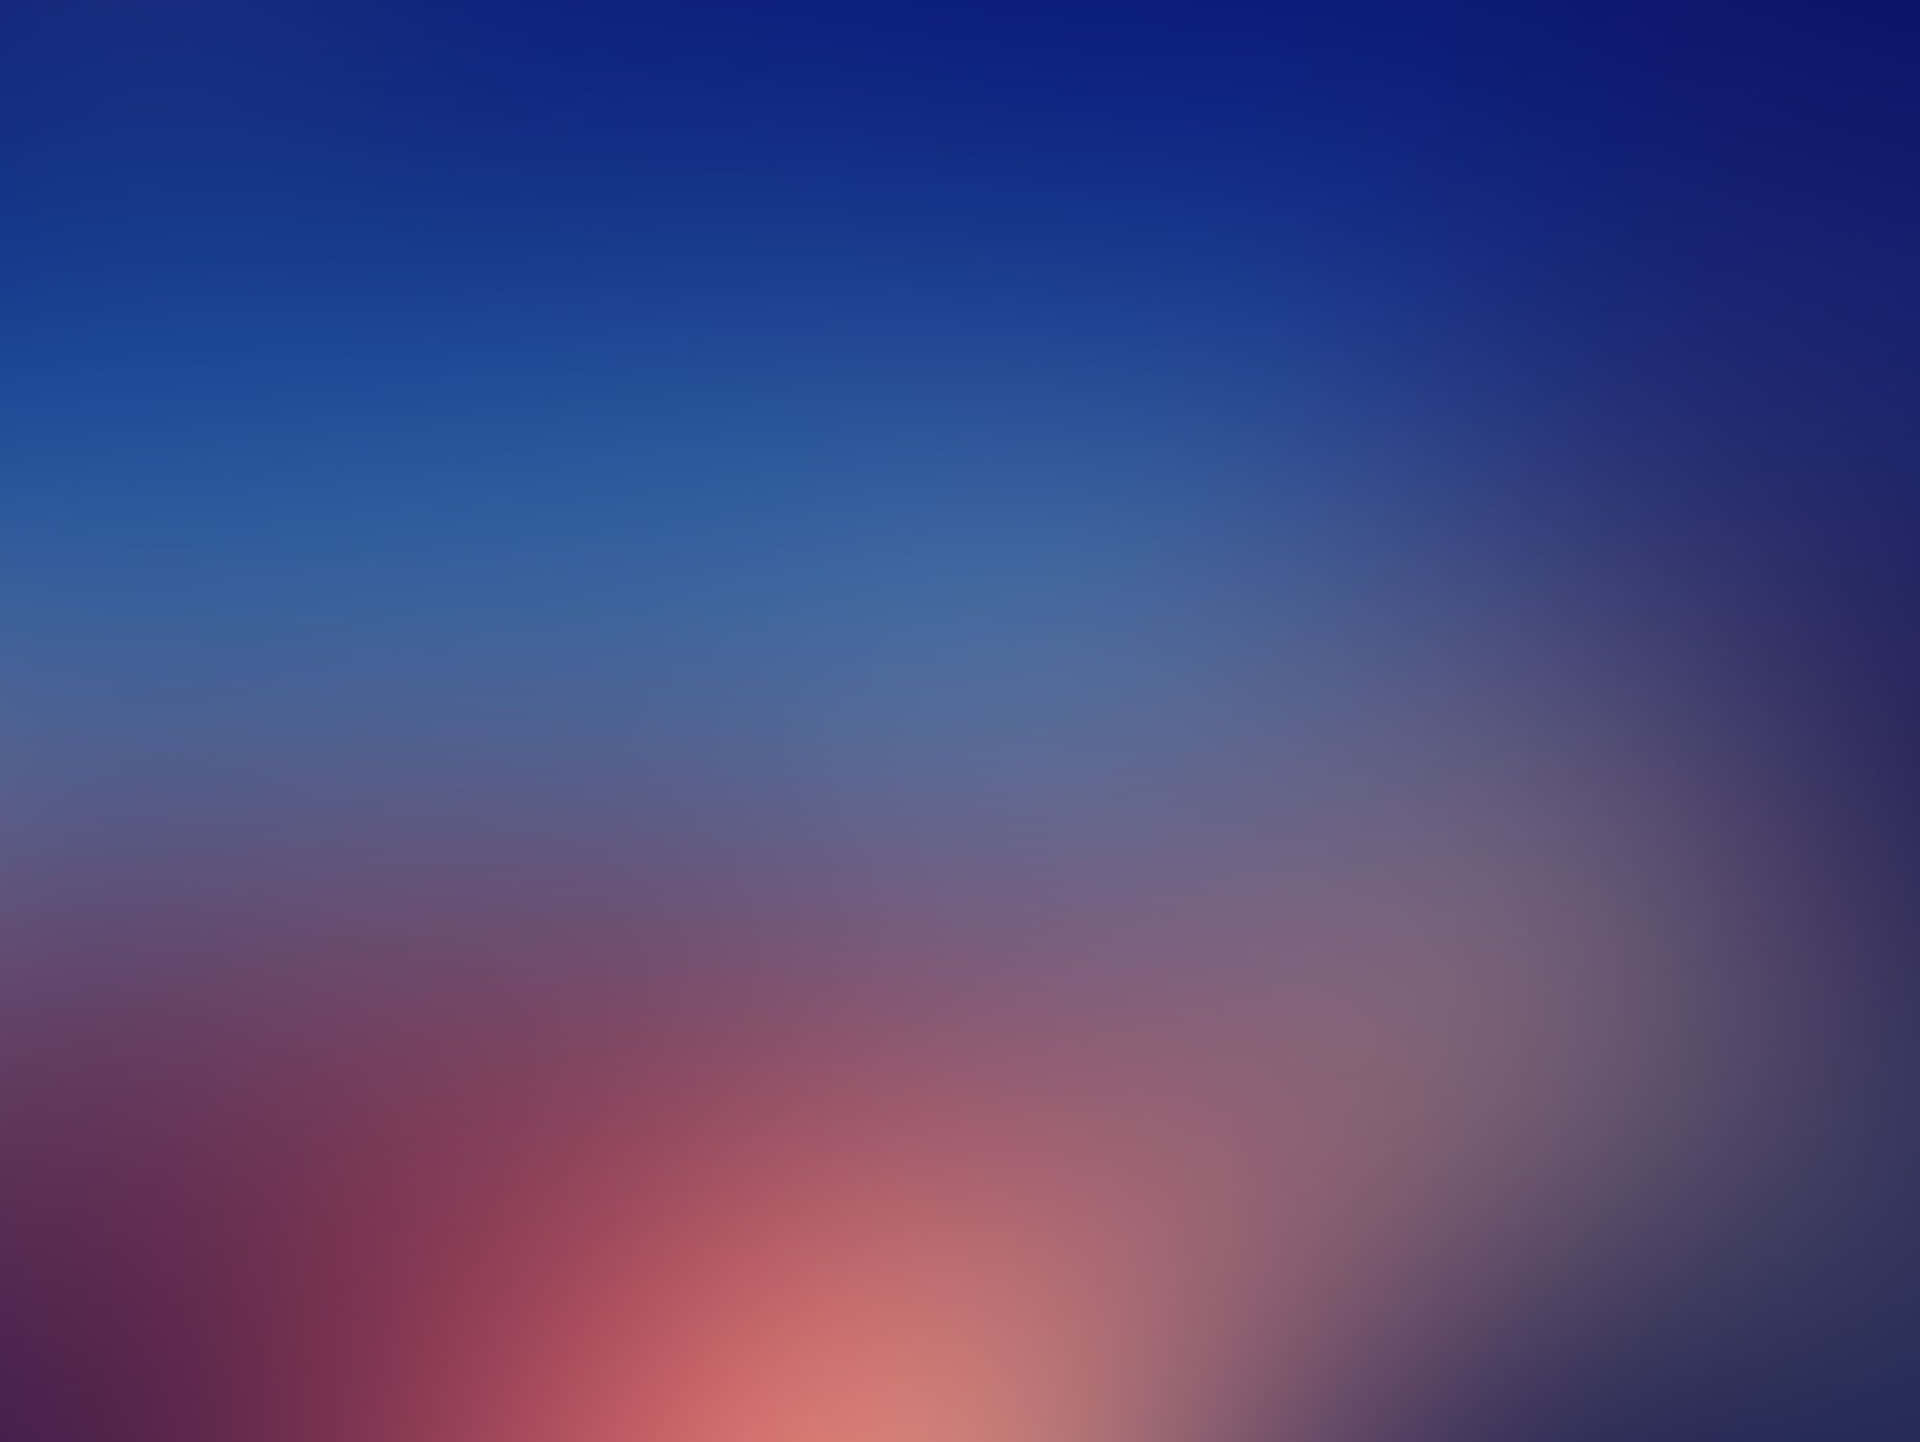 a blurred background with a blue and red color